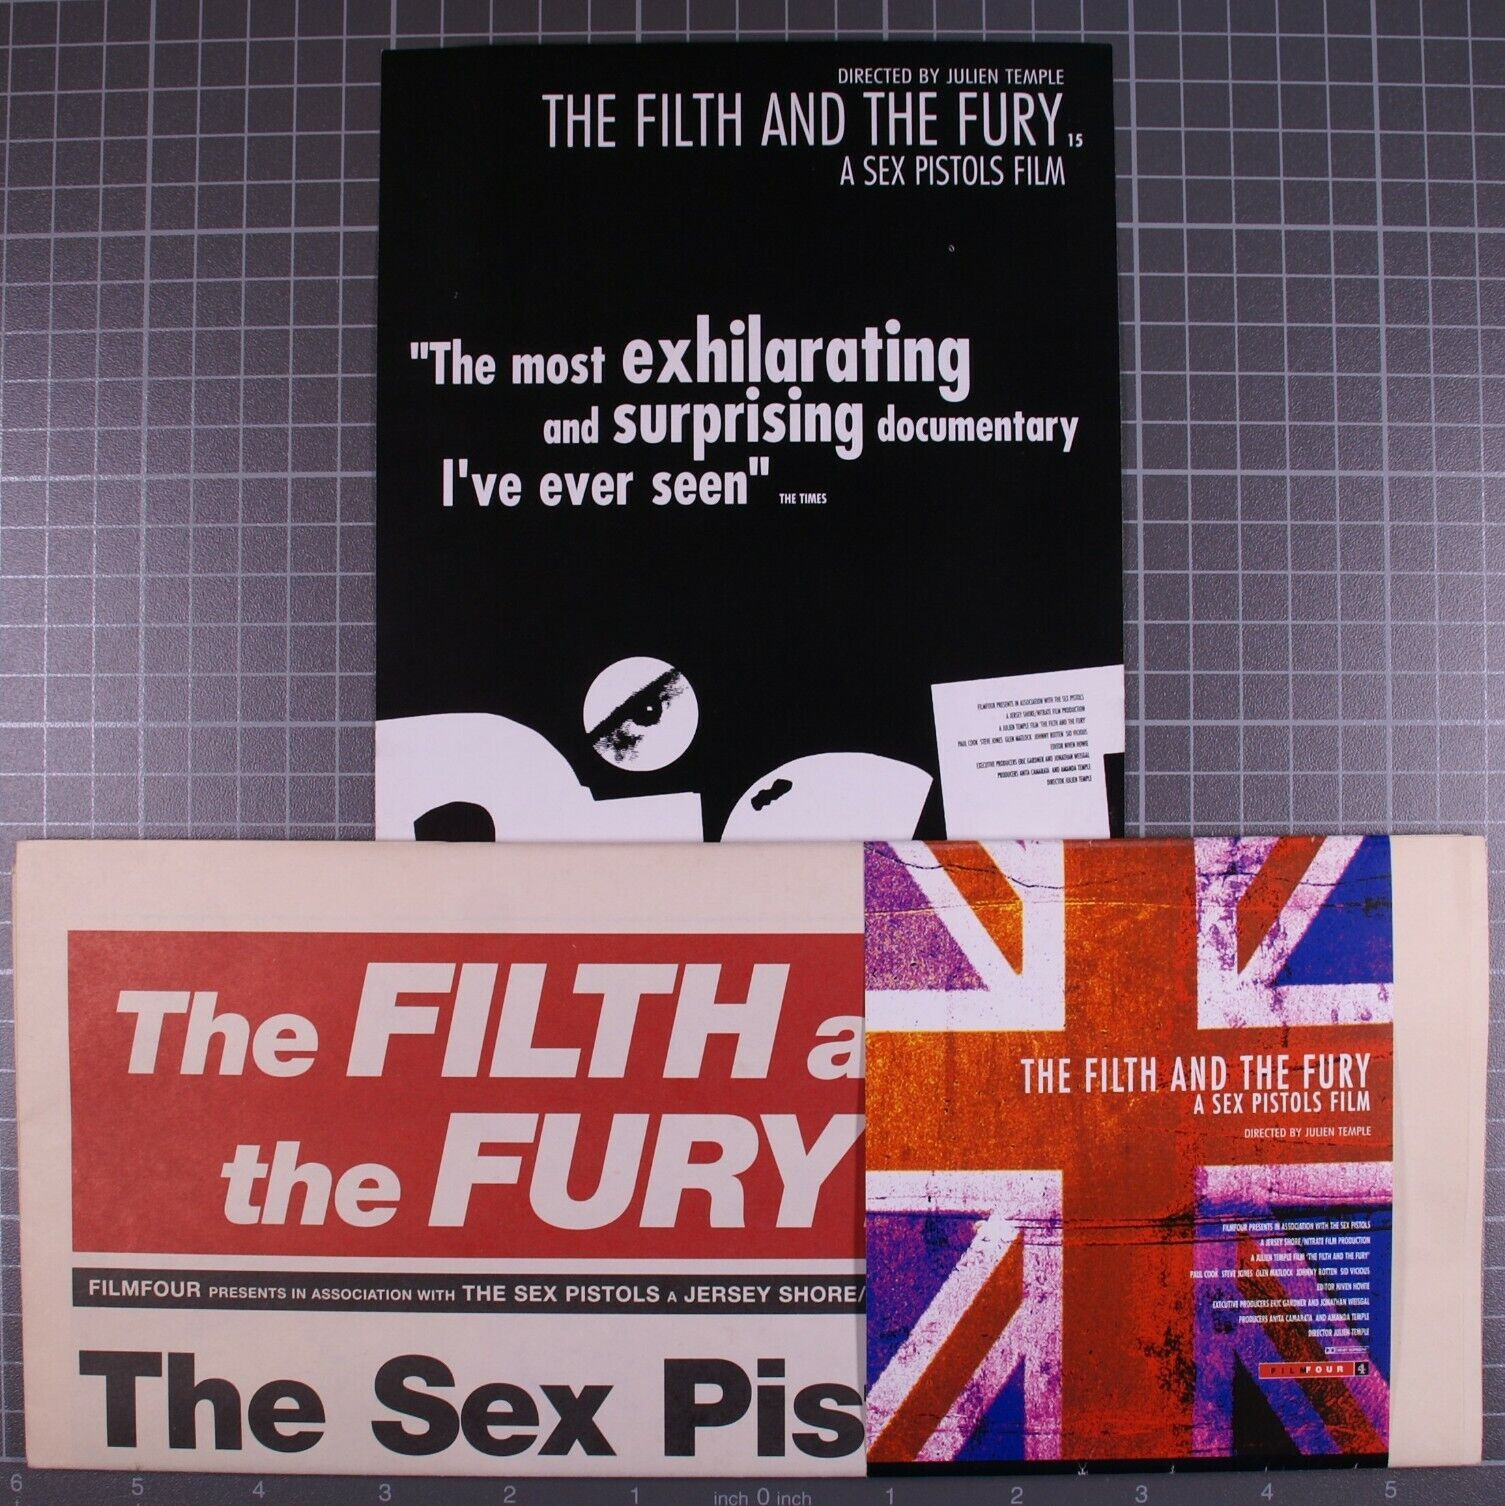 Sex Pistols Flyers x 2 Original Film Four Promo The Filth And The Fury 2000